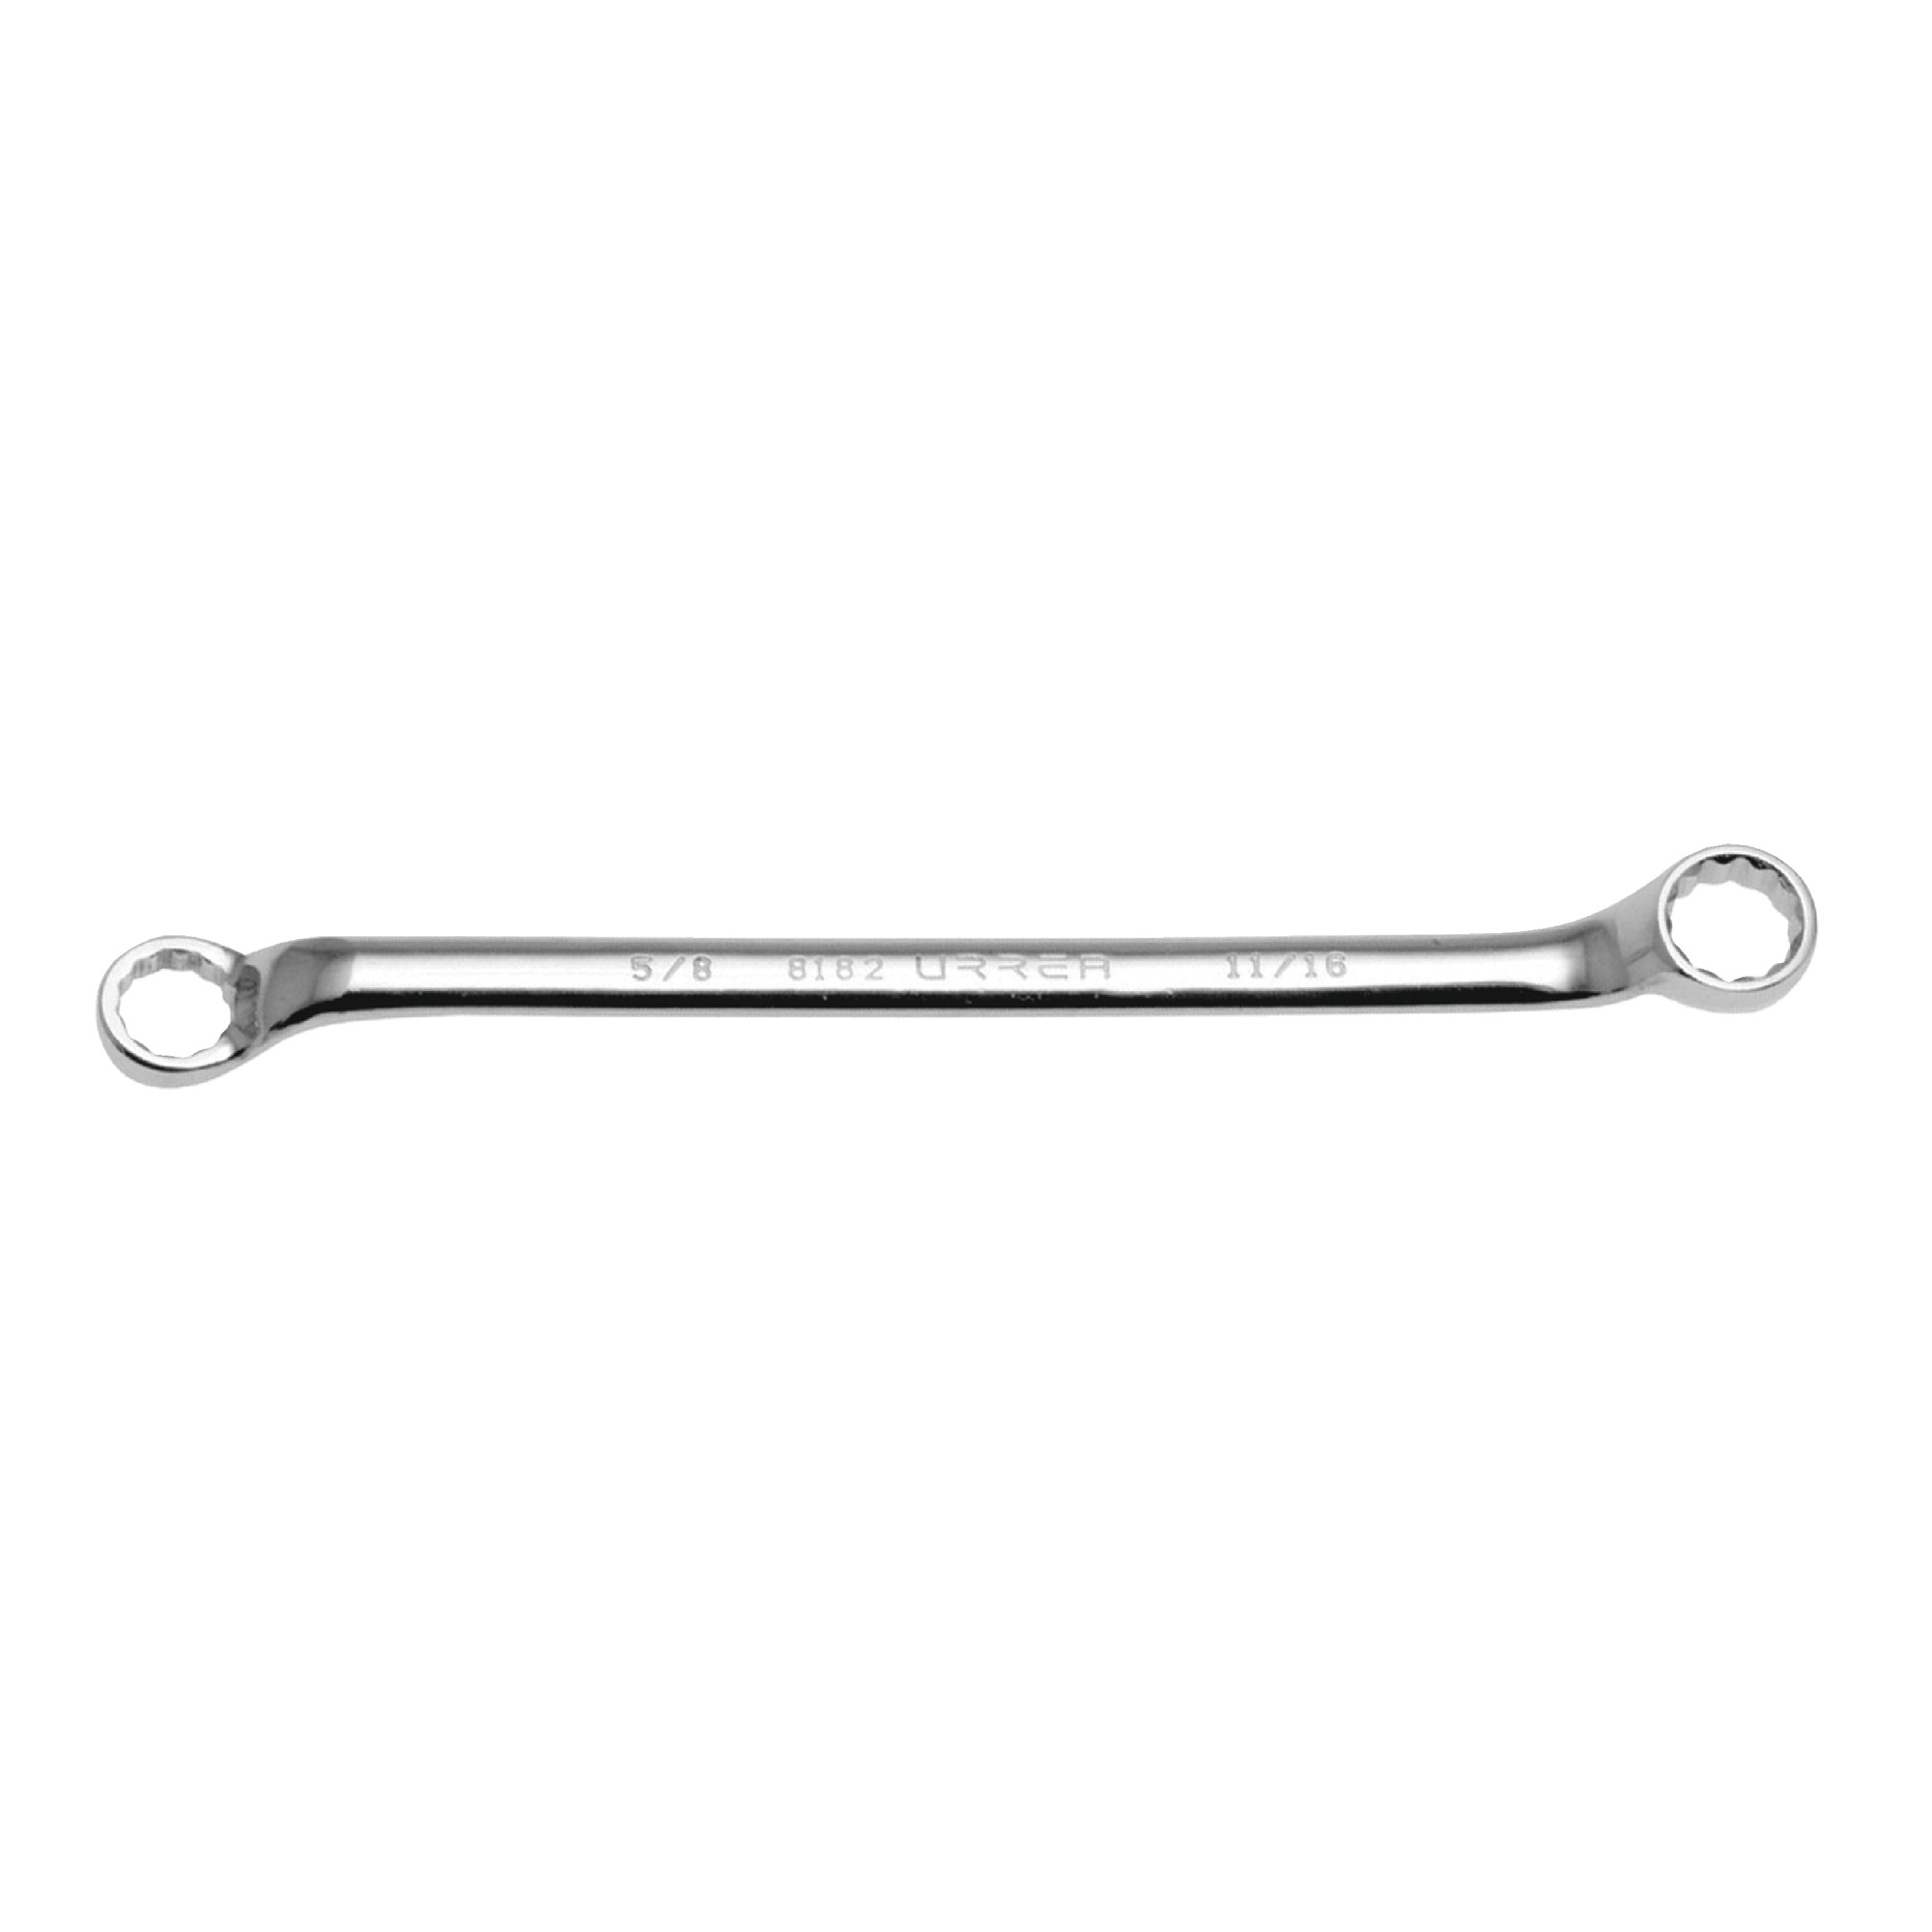 80911 9mm x 11mm Chrome Finish 12 Point Box Wrench